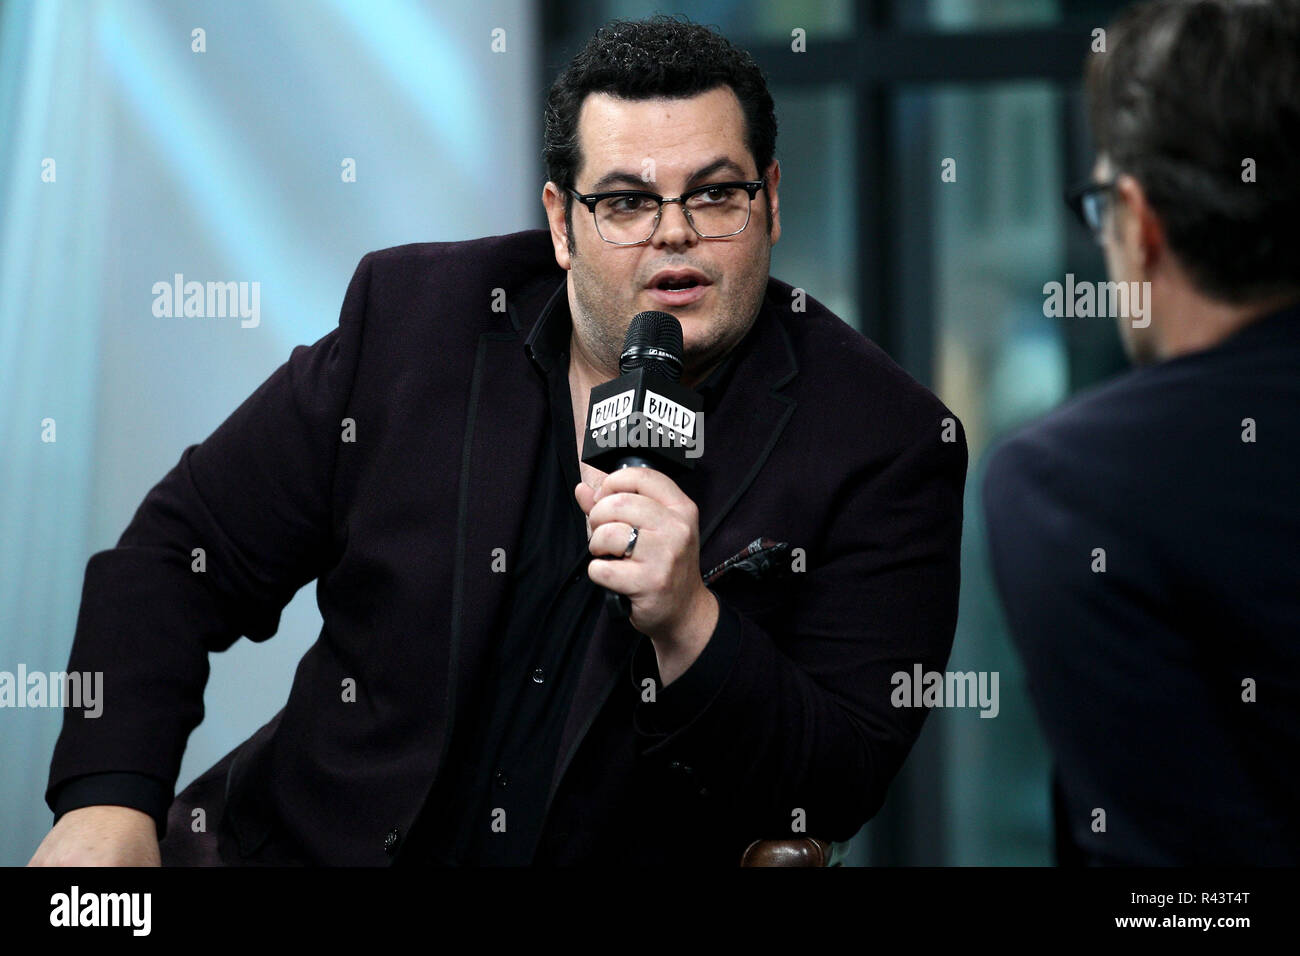 NEW YORK, NY - NOVEMBER 06:  Build presents Josh Gad discussing 'Murder On The Orient Express' at Build Studio on November 6, 2017 in New York City.  (Photo by Steve Mack/S.D. Mack Pictures) Stock Photo